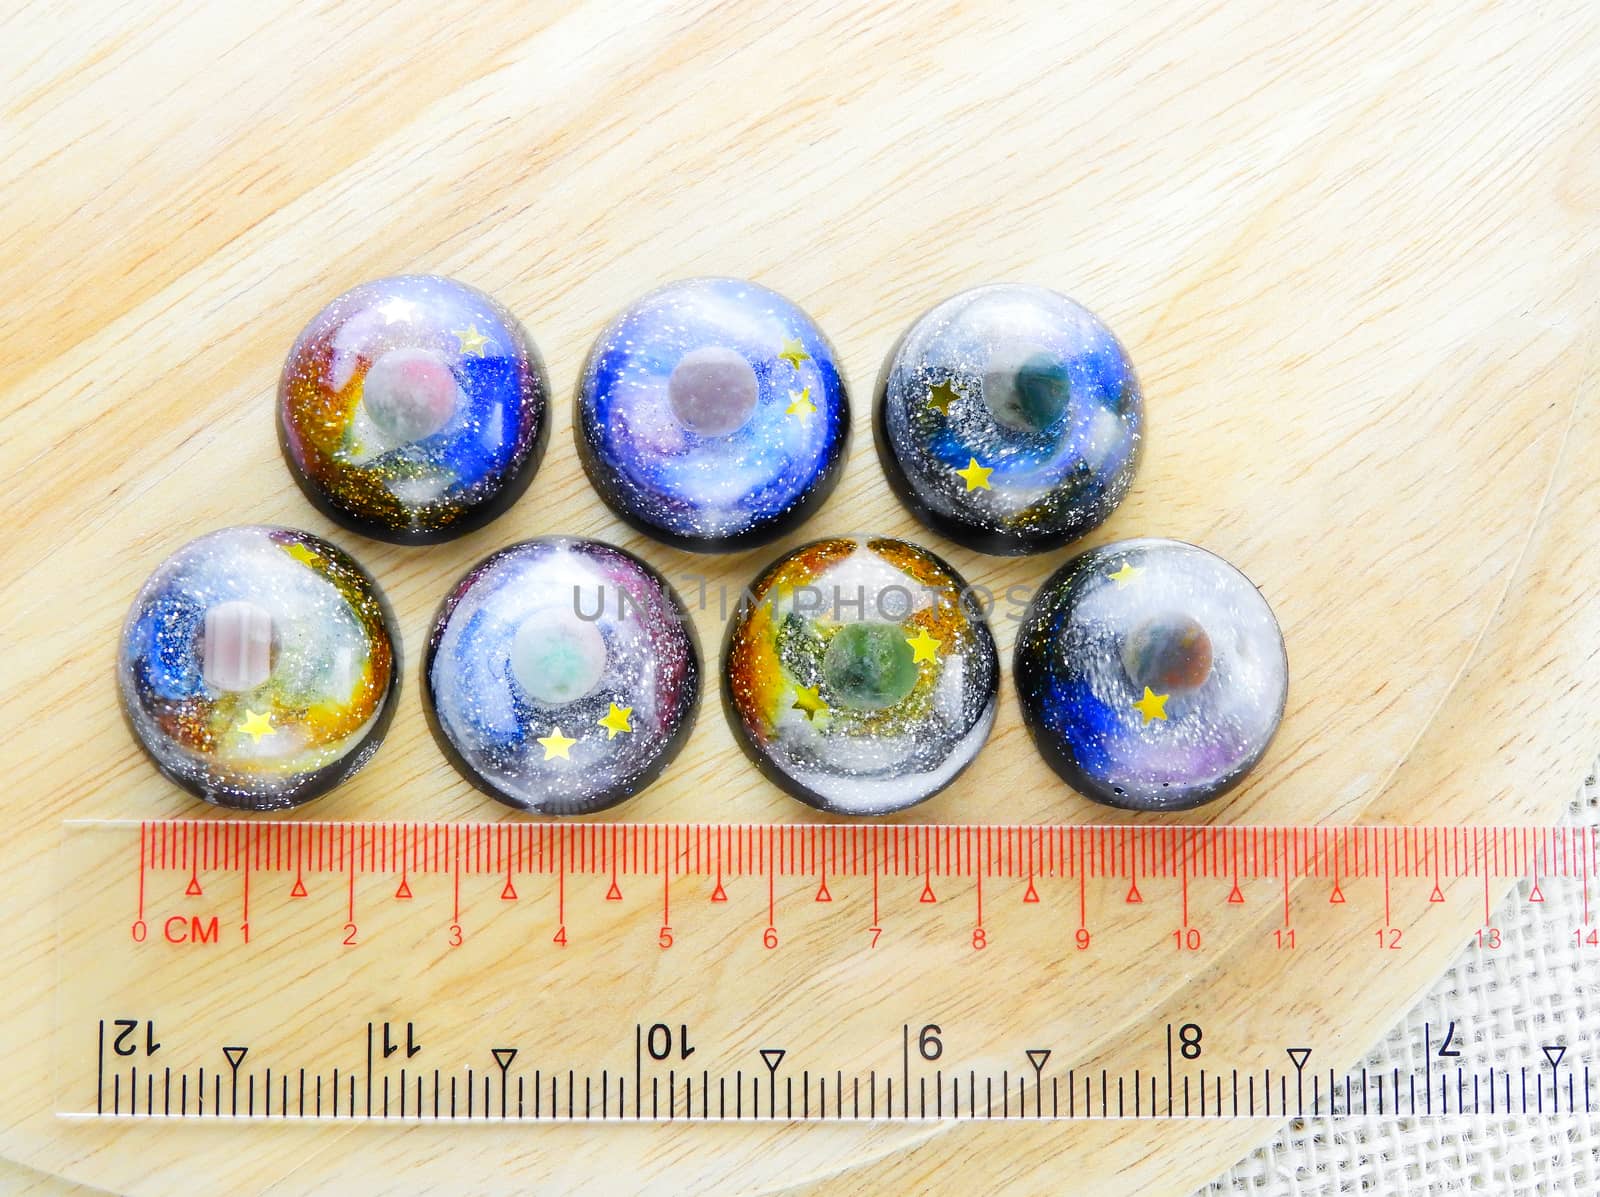 Create galaxy drink coasters using resin, glitter and pigment powders, handmade items. Suitable for keychains, necklace and pendant.